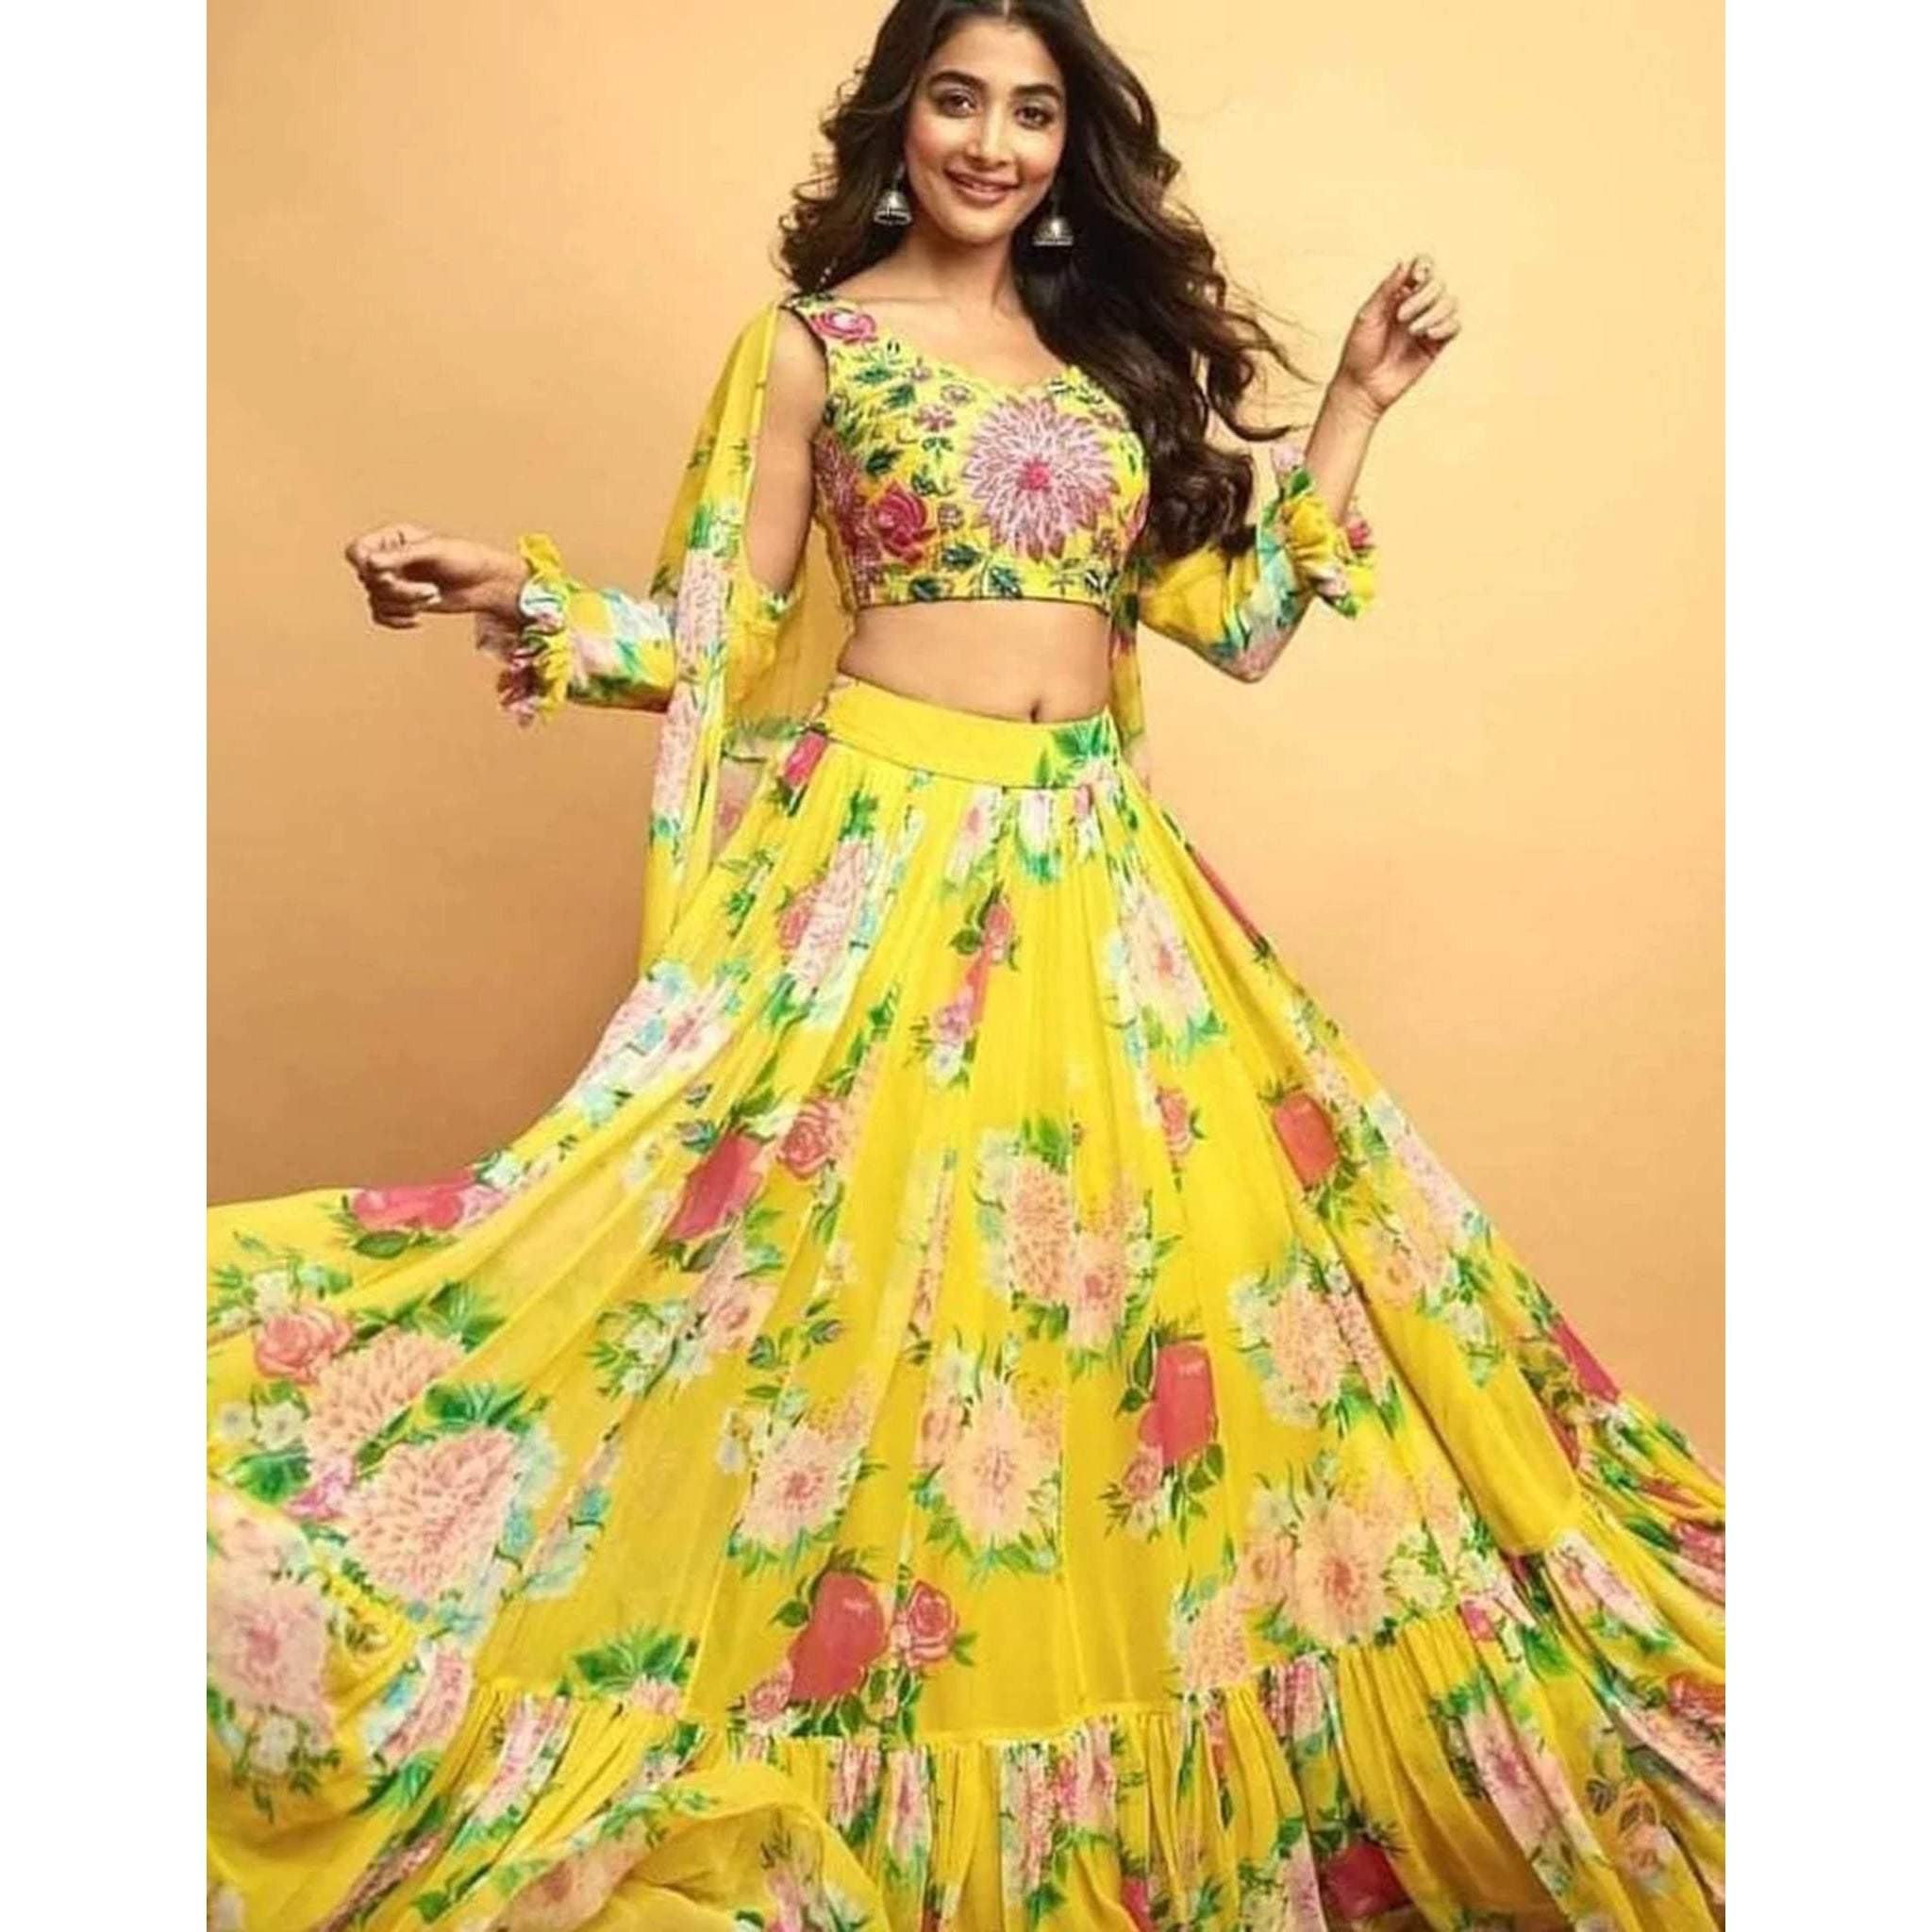 Buy RIBADIYA BROTHERS Women's Georgette Readymade Plain Lehenga Choli Set  with Sequins and Thread Work Also Comes With Both Side Tassels Koti (Pack  of 1) (YELLOW) at Amazon.in